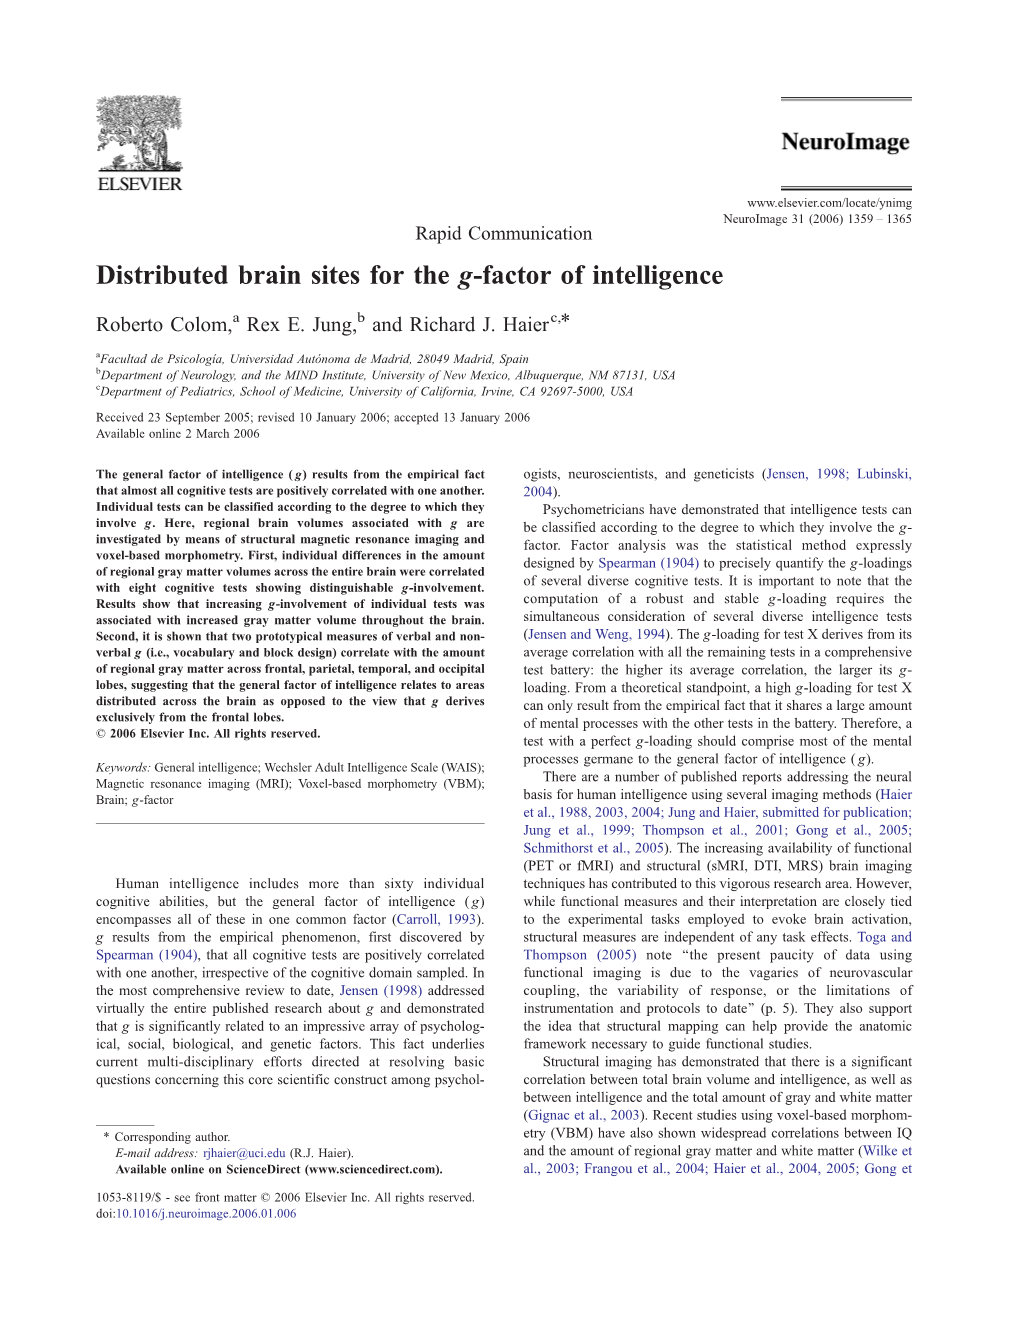 Distributed Brain Sites for the G-Factor of Intelligence